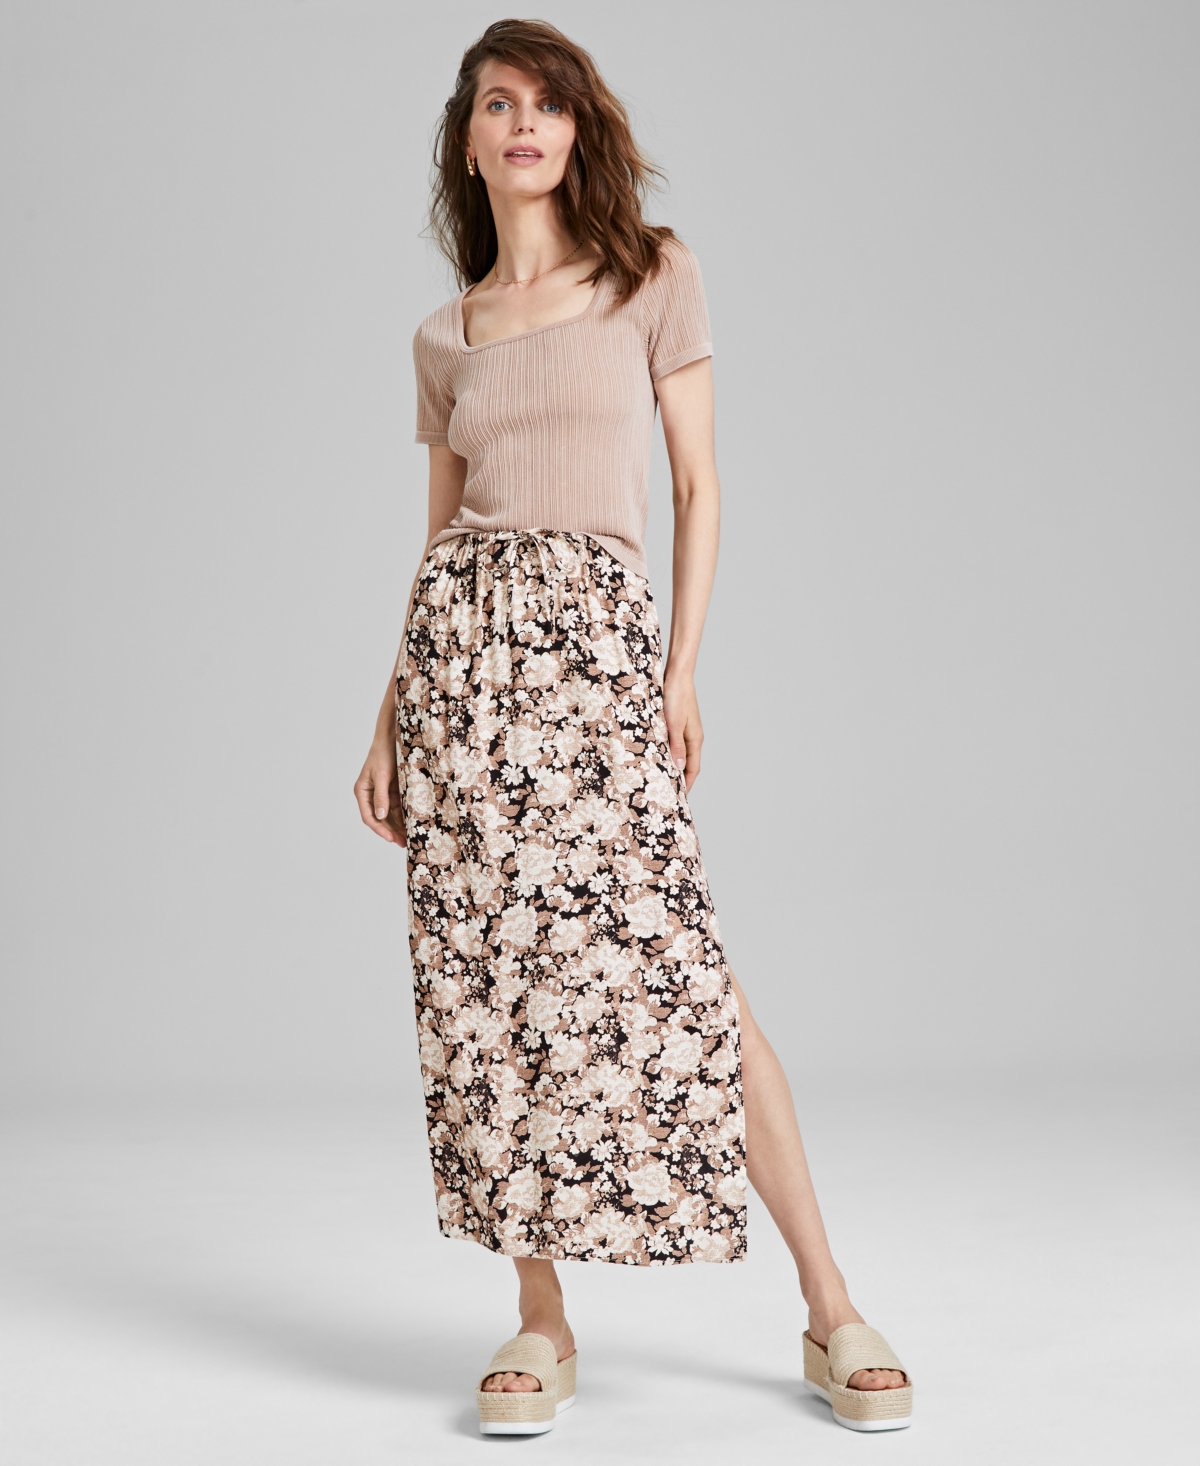 Women's Printed Pull-On Slit-Front Skirt, Created for Macy's - Black Floral